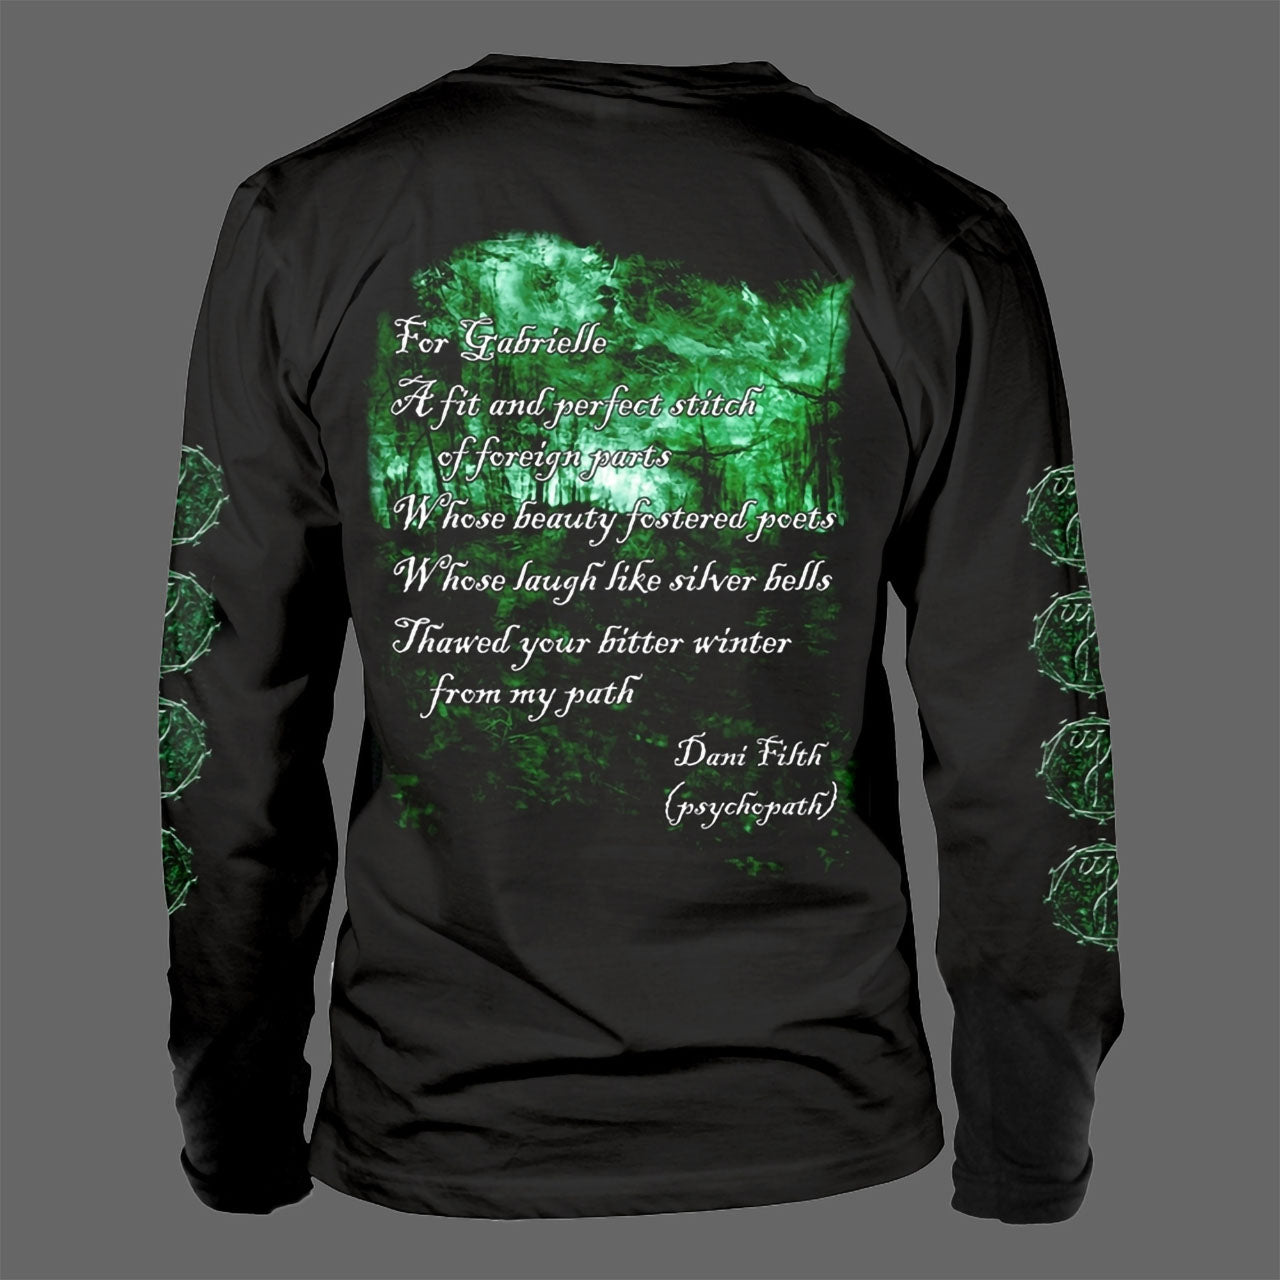 Cradle of Filth - Gabrielle (Long Sleeve T-Shirt)